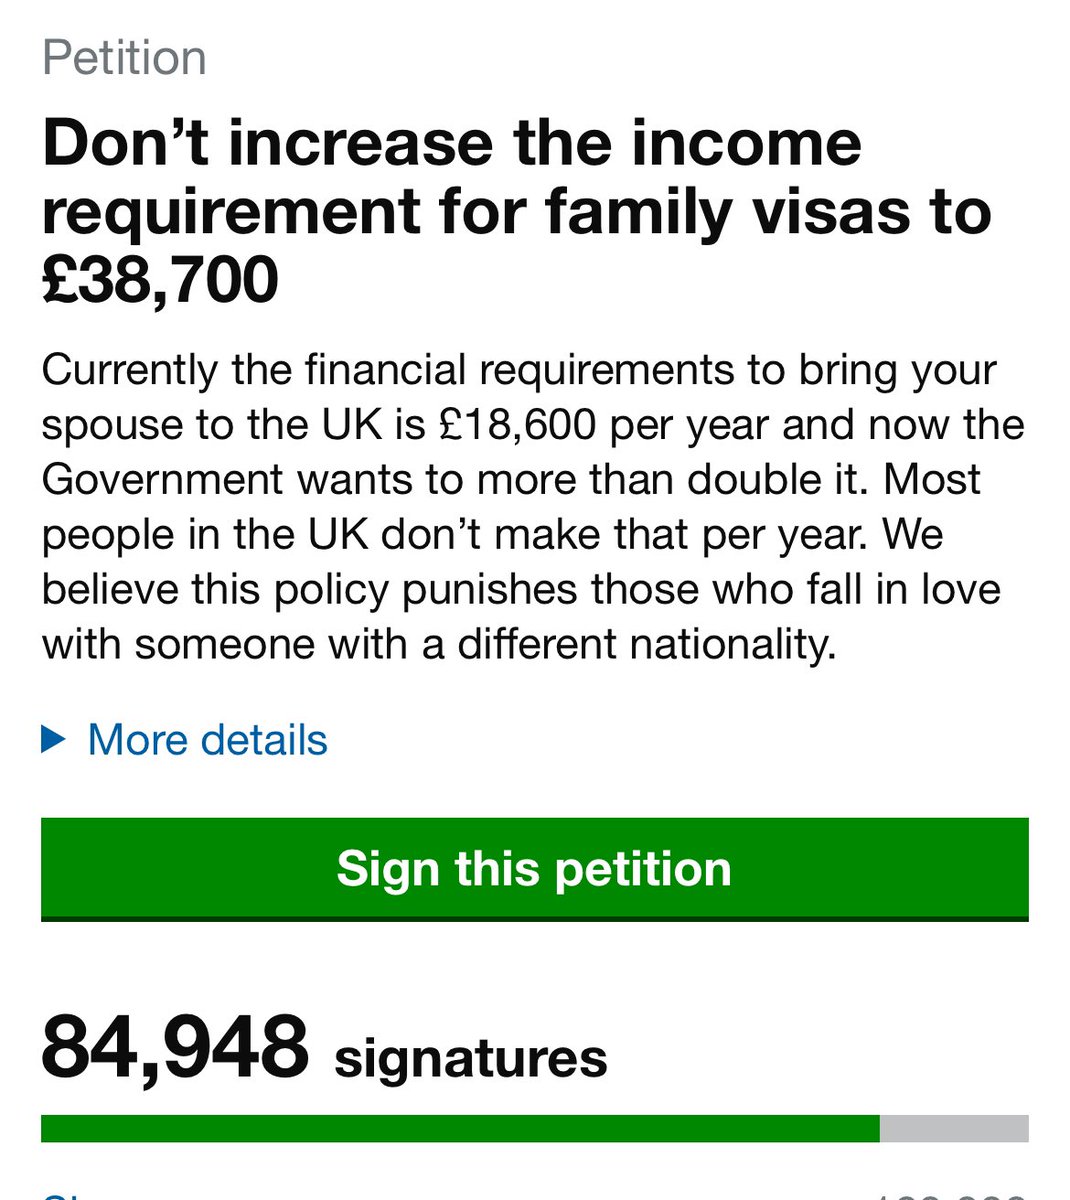 Come on guys please help 🙏 Have a thought for those separated by an over inflated, un researched, draconian MIR! 15k Signatures needed! @the3million @BritCits @ZoeJardiniere @E_L_James @IMIX_UK @ReuniteDivFamil @alisonthewliss @PaulBlomfieldMP bit.ly/3uBT7NN